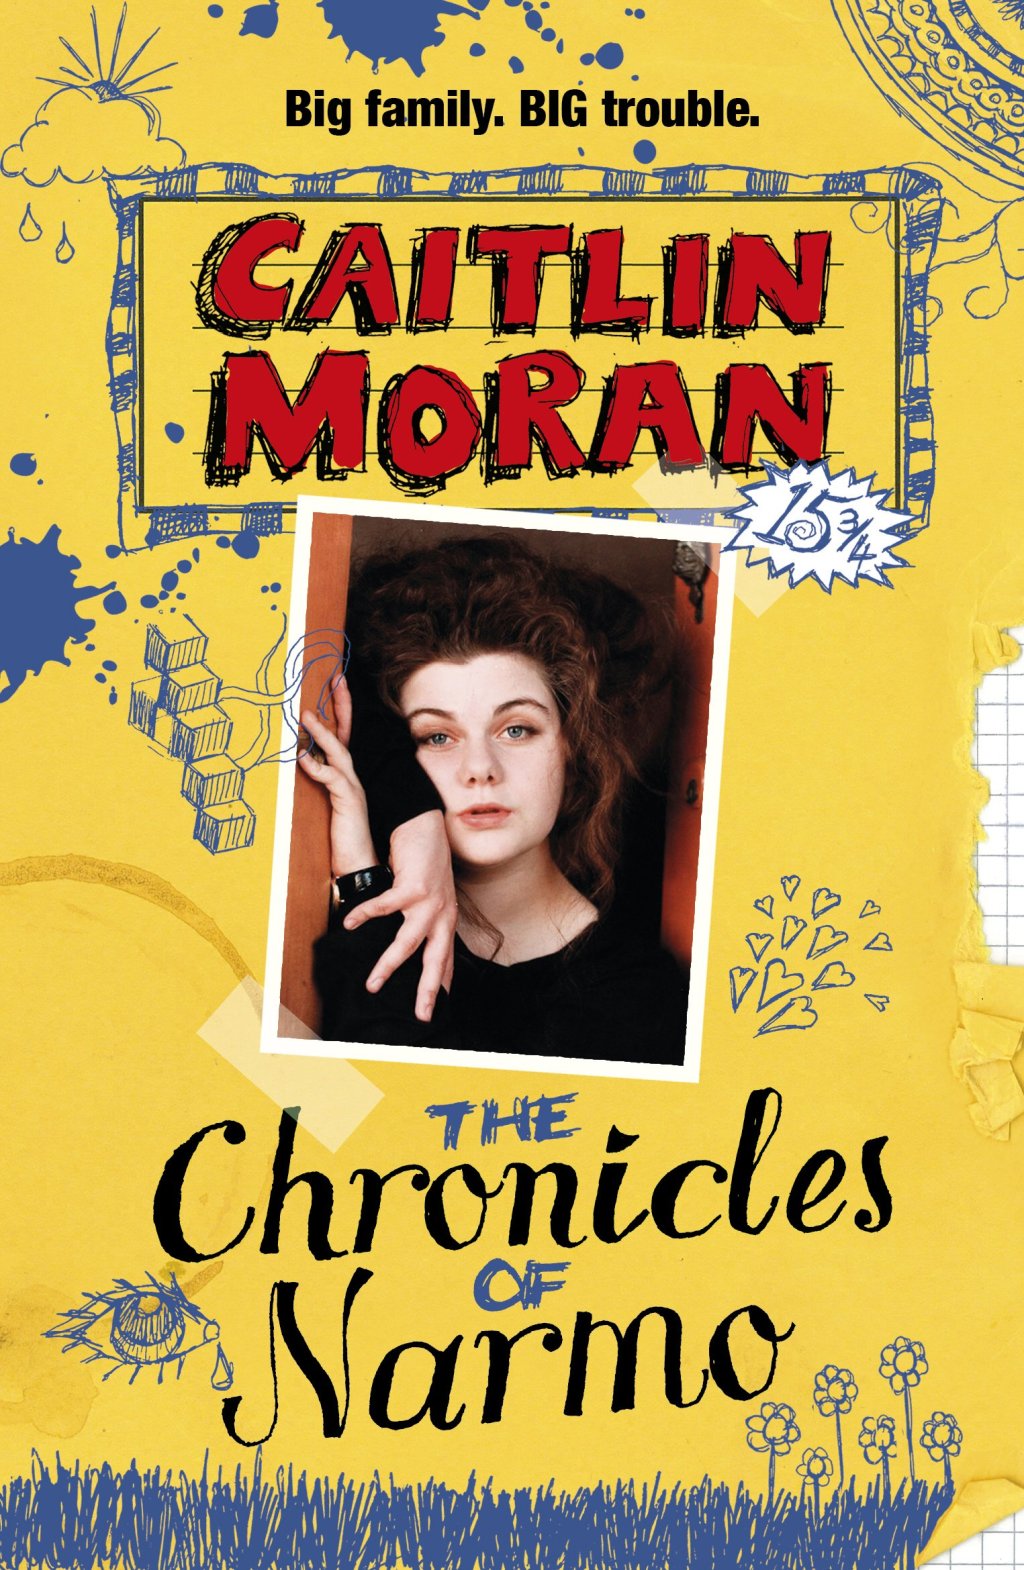 The Chronicles Of Narmo by Caitlin Moran (Corgi, 1992) - listen to Tim Worthington and Paul Abbott talking about it in Looks Unfamiliar,